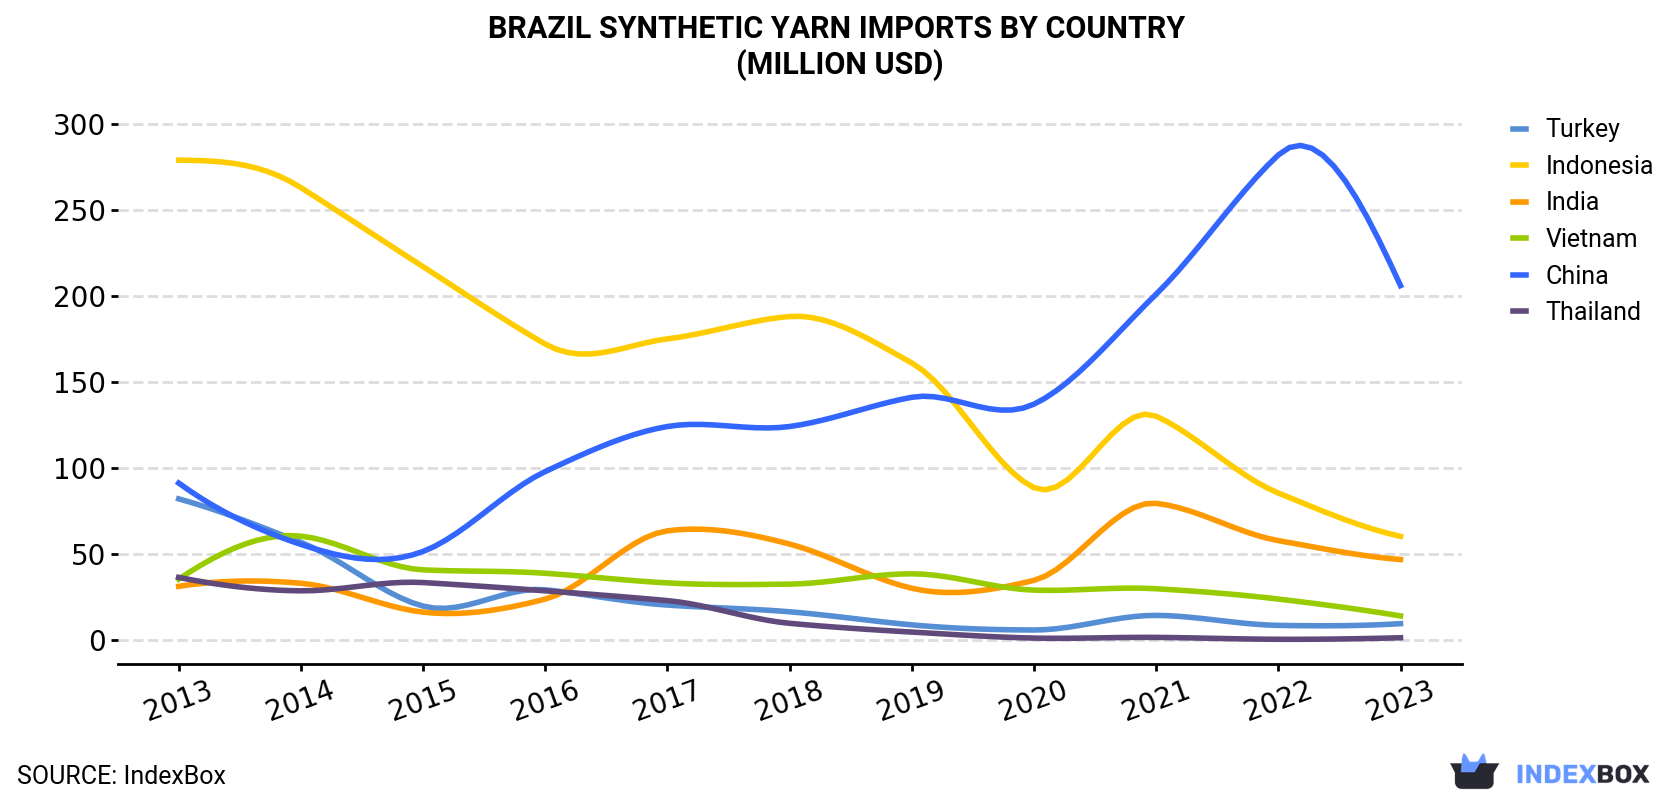 Brazil Synthetic Yarn Imports By Country (Million USD)